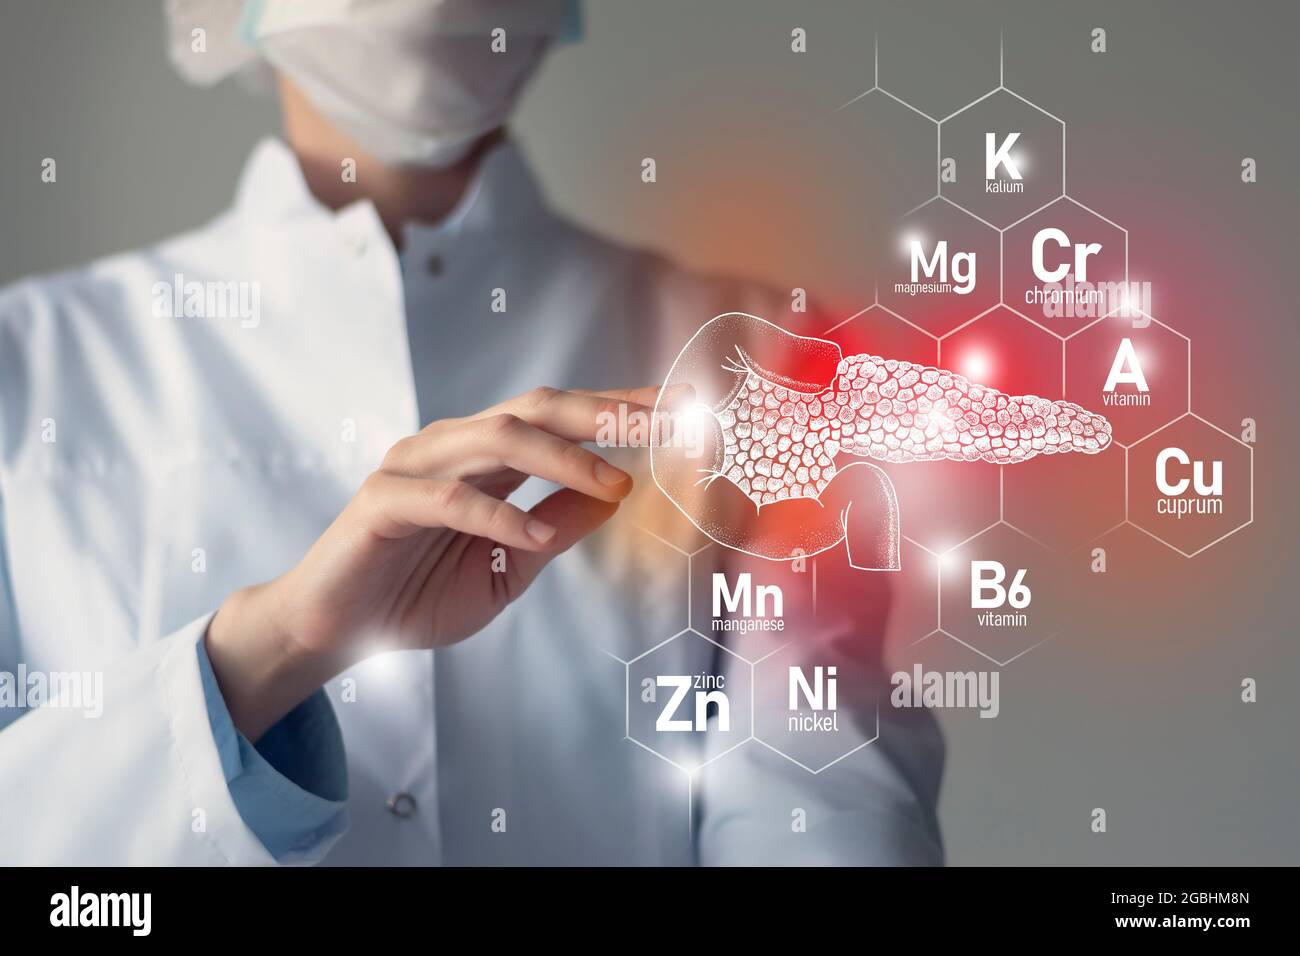 Essential nutrients for Pancreas health including Nickel, Chromium, Cuprum, Manganese. Blurred portrait of doctor holding highlighted red Pancreas. Stock Photo